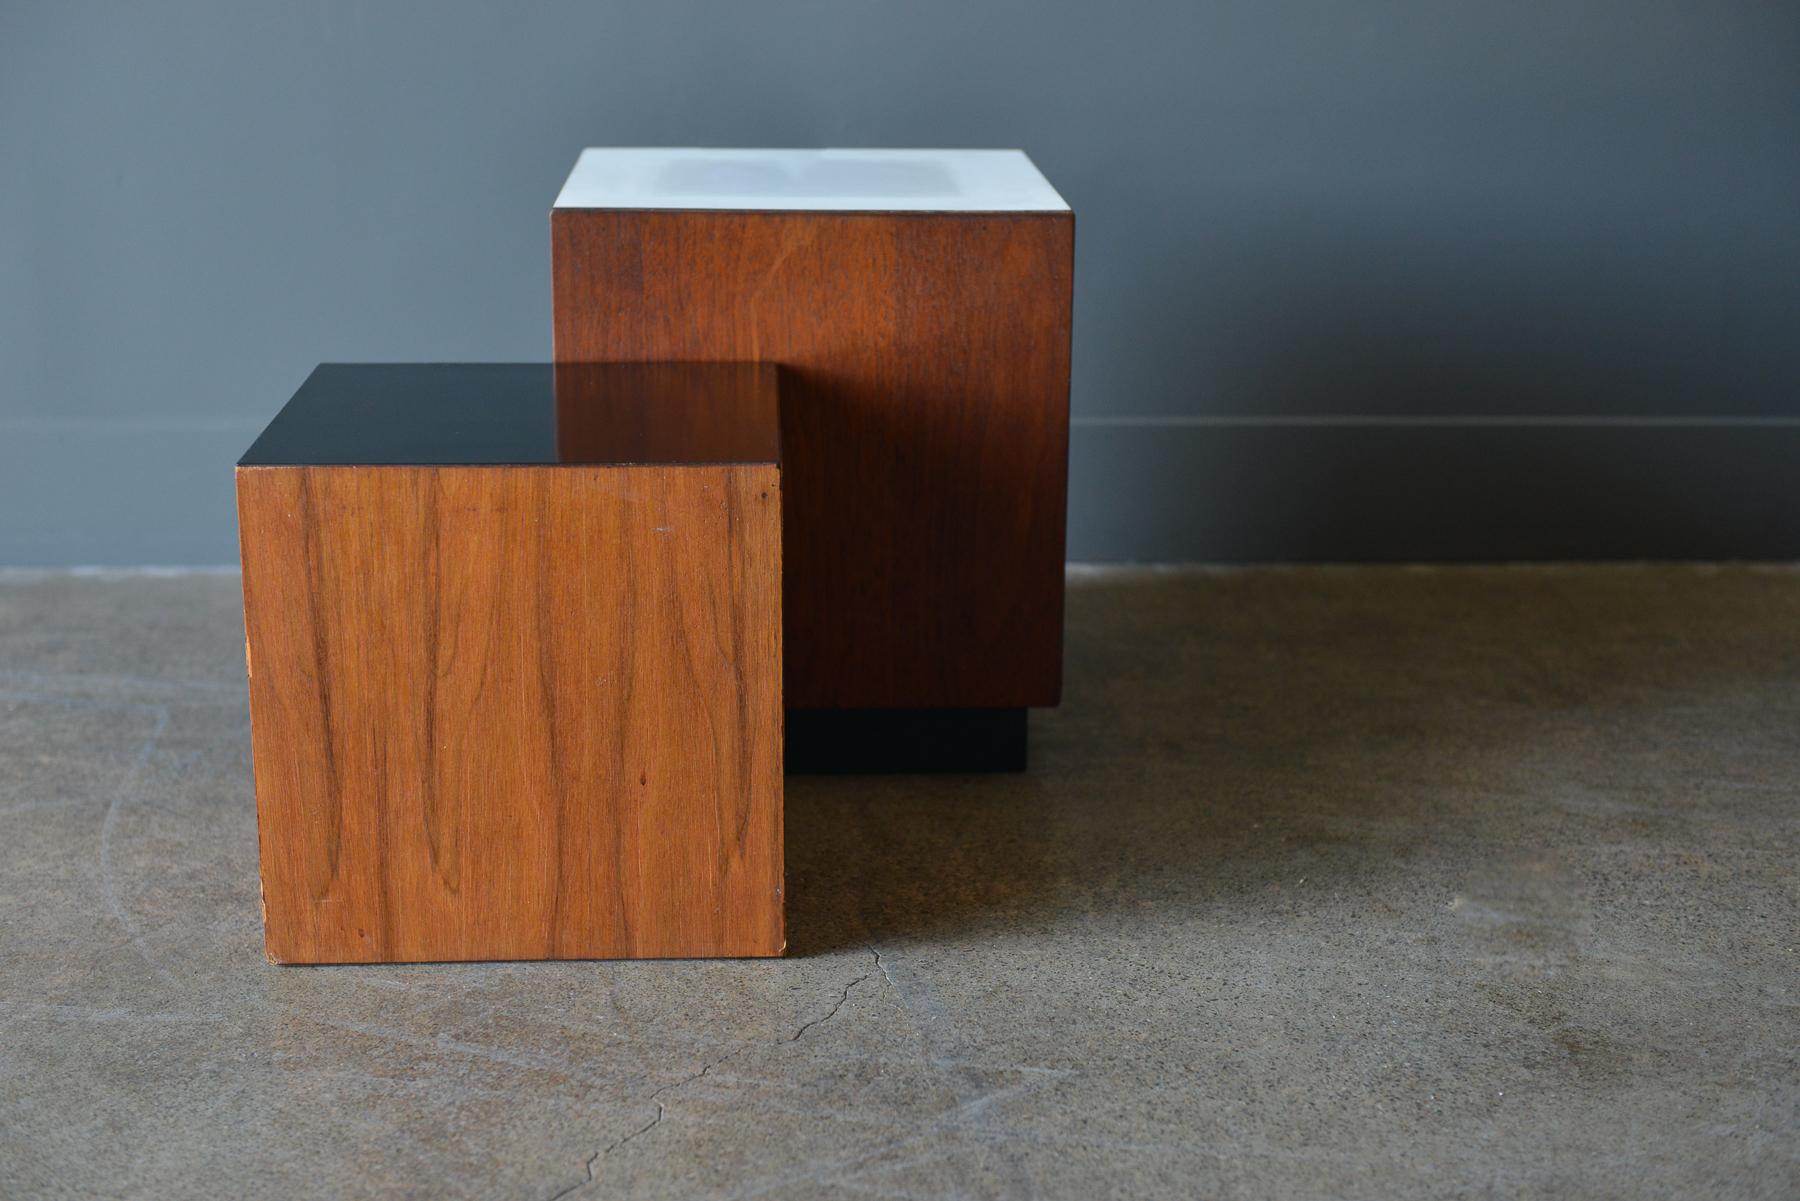 Midcentury walnut display cubes or side tables, circa 1970. Walnut with white and black laminate sides, they can be used together as small side tables, or as display pedestals for artwork or sculpture. Large measures 12 x 12 x 14 H and small